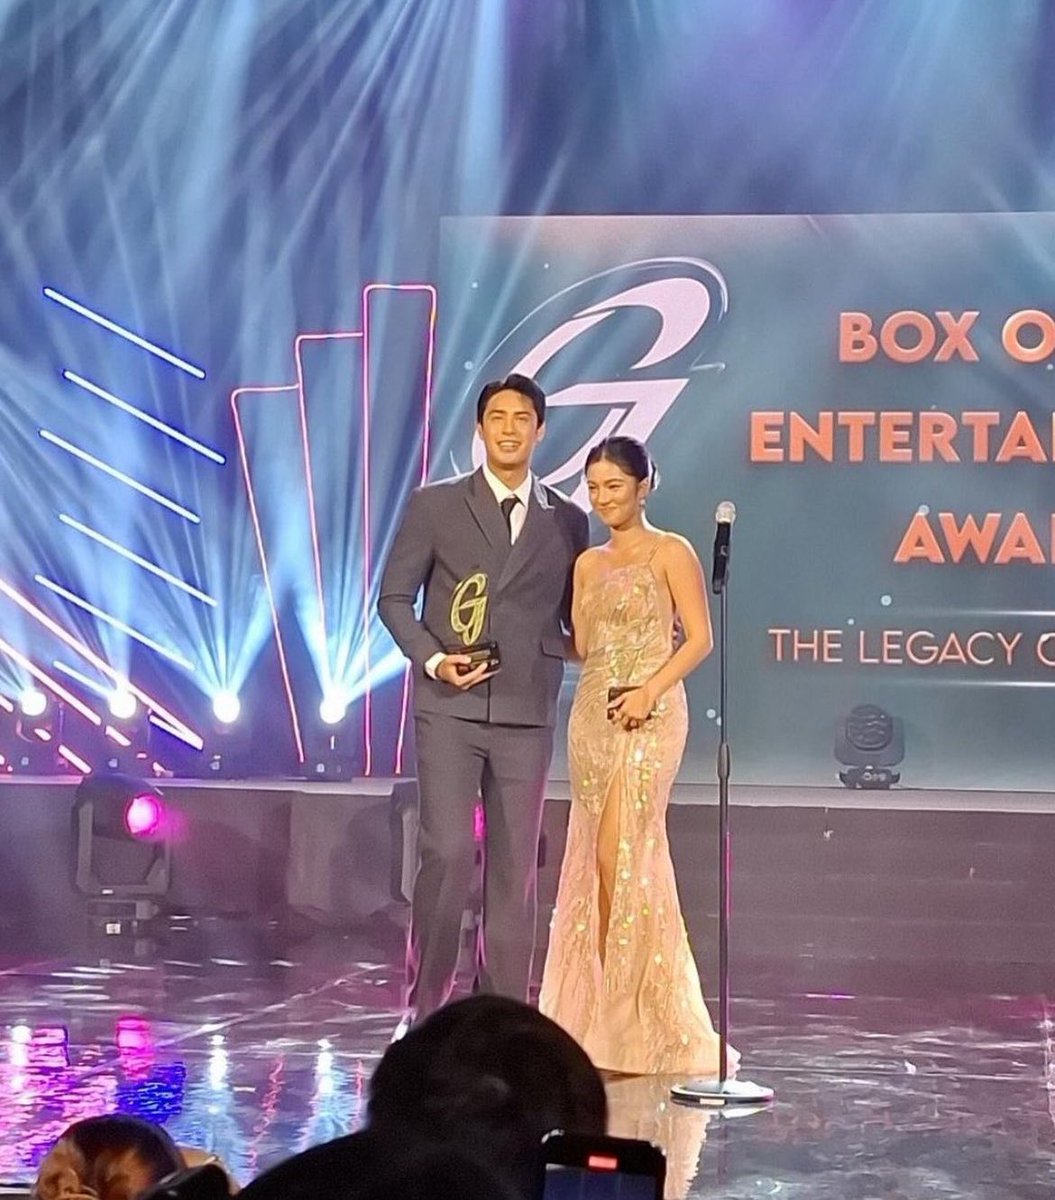 Donny Pangilinan and Belle Mariano are crowned Prince and Princess of Philippine Entertainment at the 52nd Box Office Entertainment Awards! 🎉

Congratulations and thank you to everyone for your continued support! 🫶